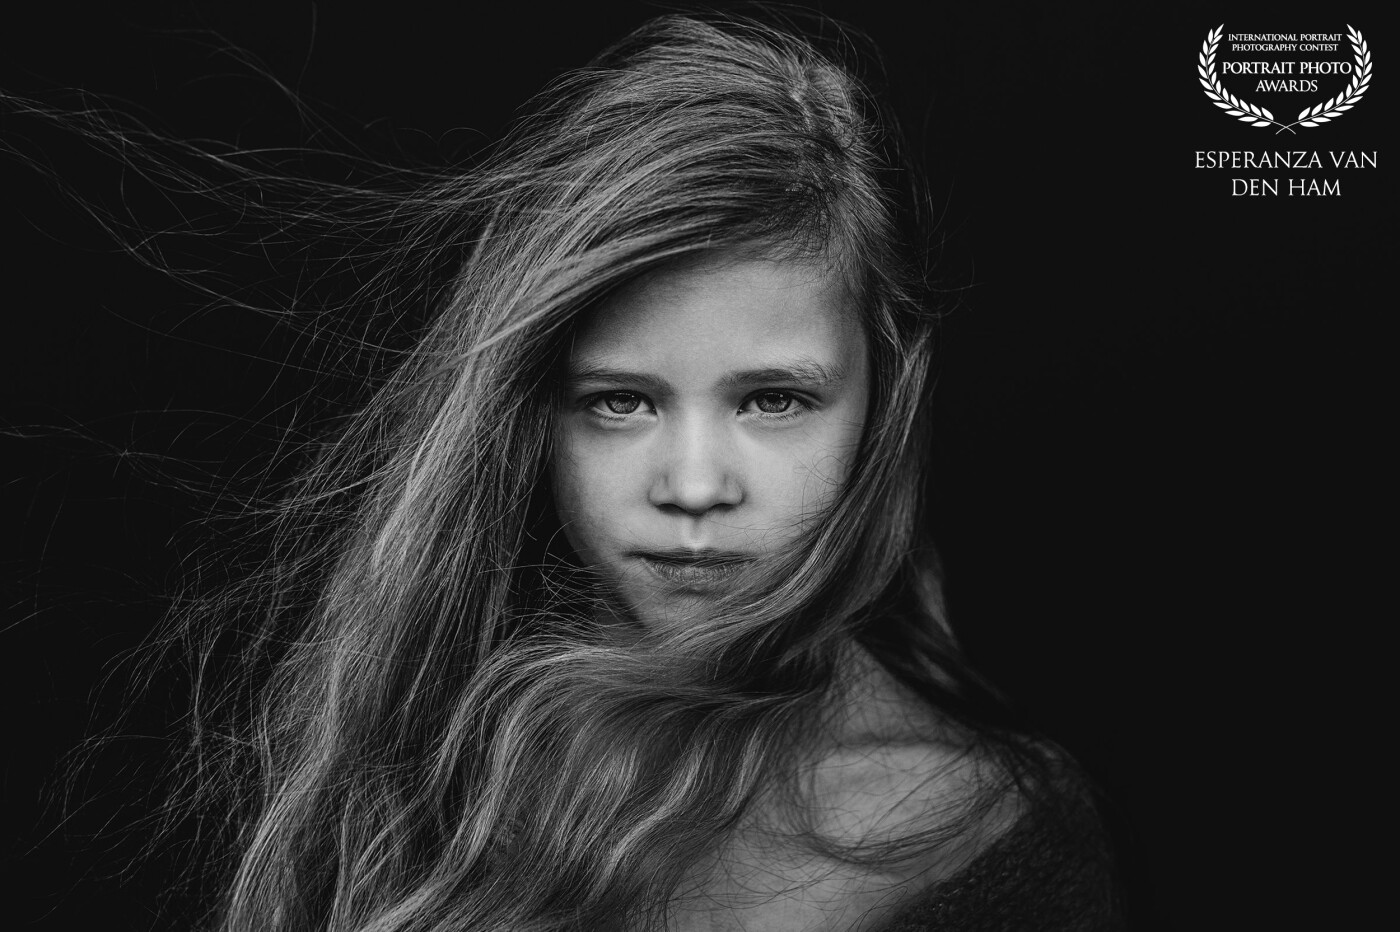 Model: Roos<br />
Created by: @iamshootingportraits<br />
www.iamshootingportraits.nl<br />
<br />
This photo is already my favorite image of the year, thanks to the perfect combination of contrast, the girl, the fluttering strands of hair, and her skin tone. Everything seems to blend perfectly, and this photo exudes an extraordinary aura. All rights reserved.